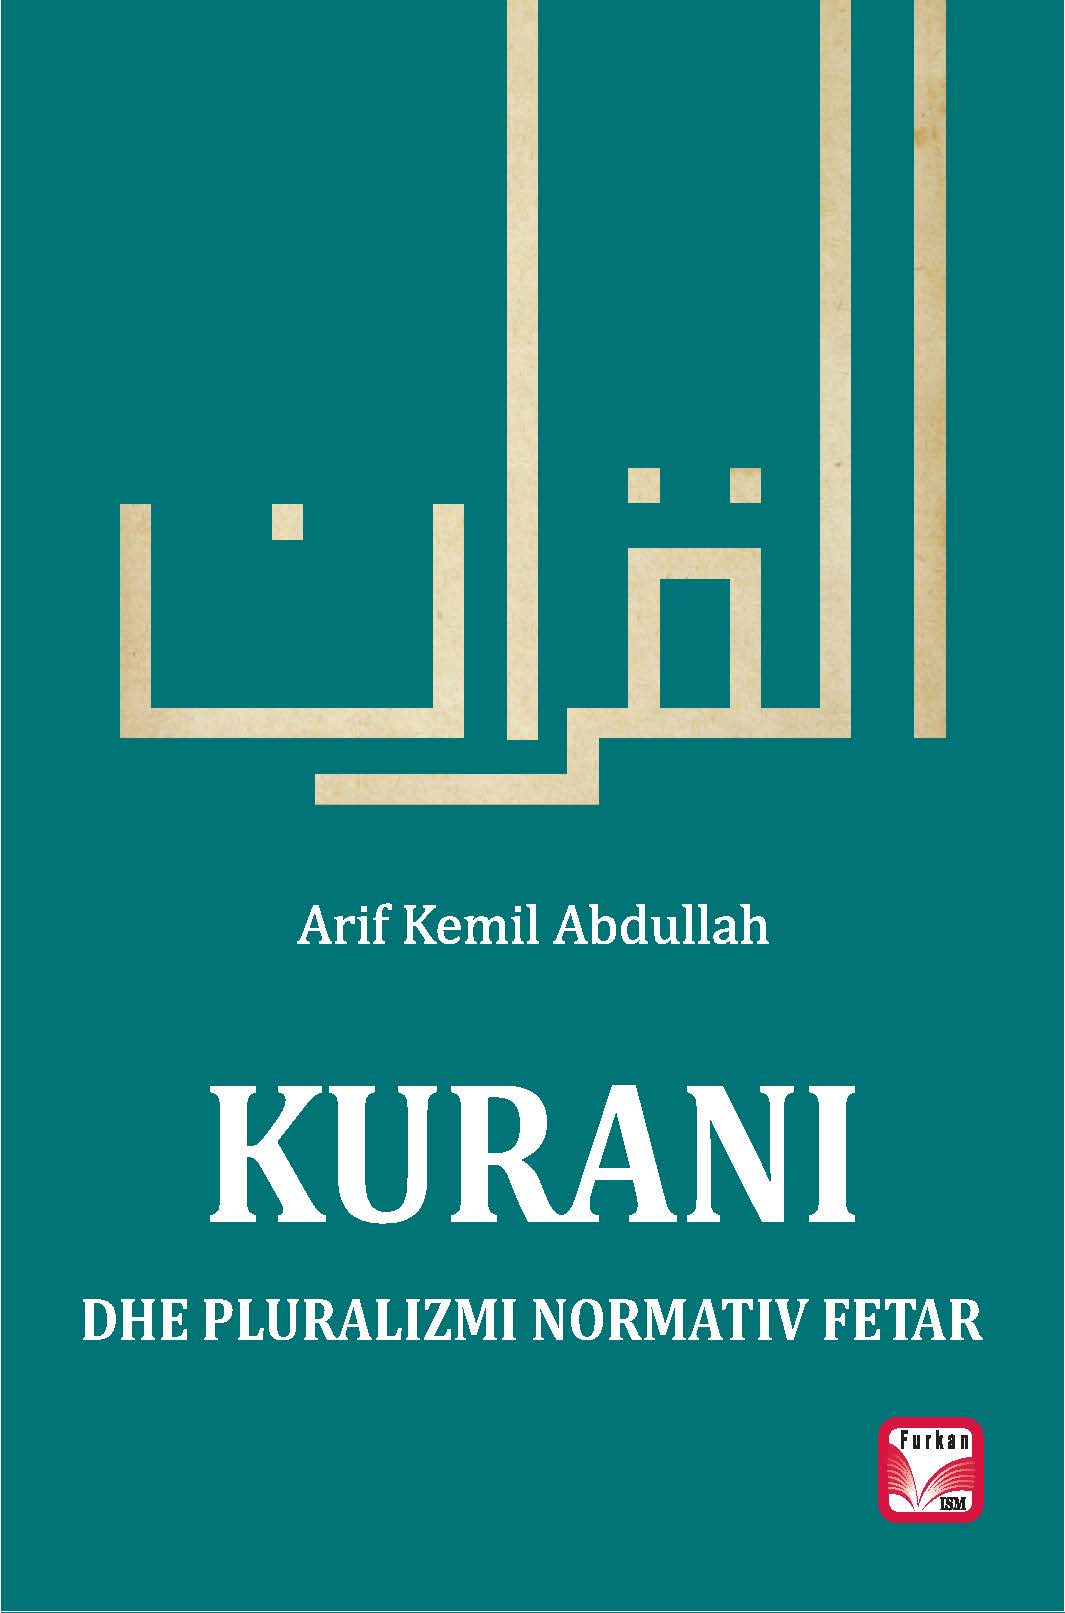 Albanian: Kurani dhe pluralizmi fetar normativ: analiza tematike e Kuranit (The Qur’an and Normative Religious Pluralism: A Thematic Study of the Qur’an)